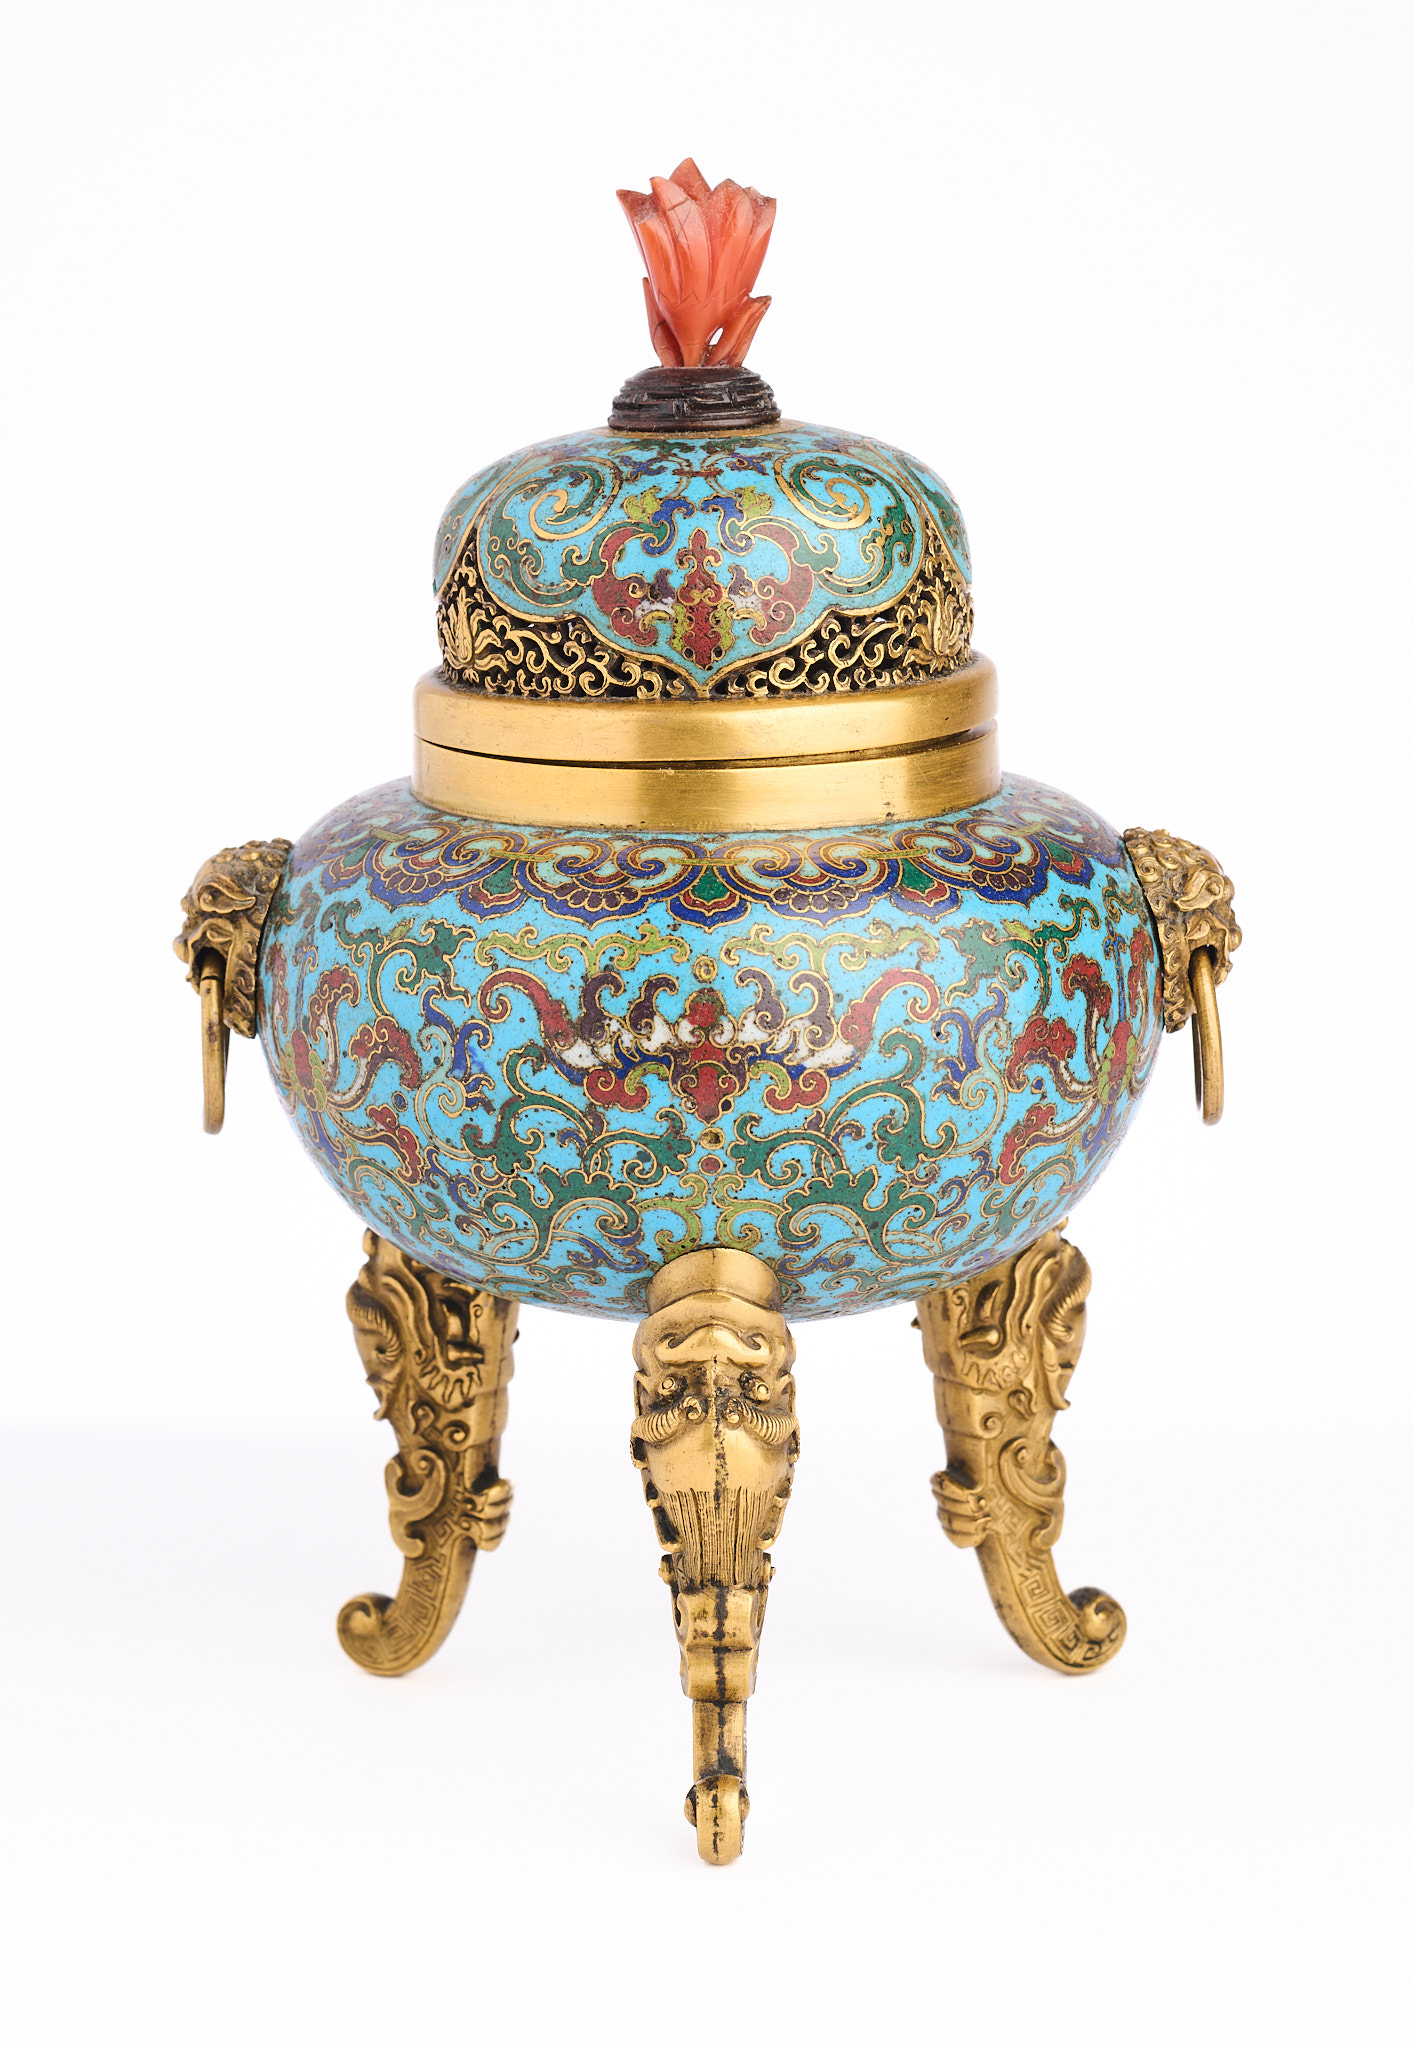 A CHINESE GILT-BRONZE AND CLOISONNE ENAMEL TRIPOD CENSER AND COVER, QING DYNASTY, QIANLONG PERIOD (1